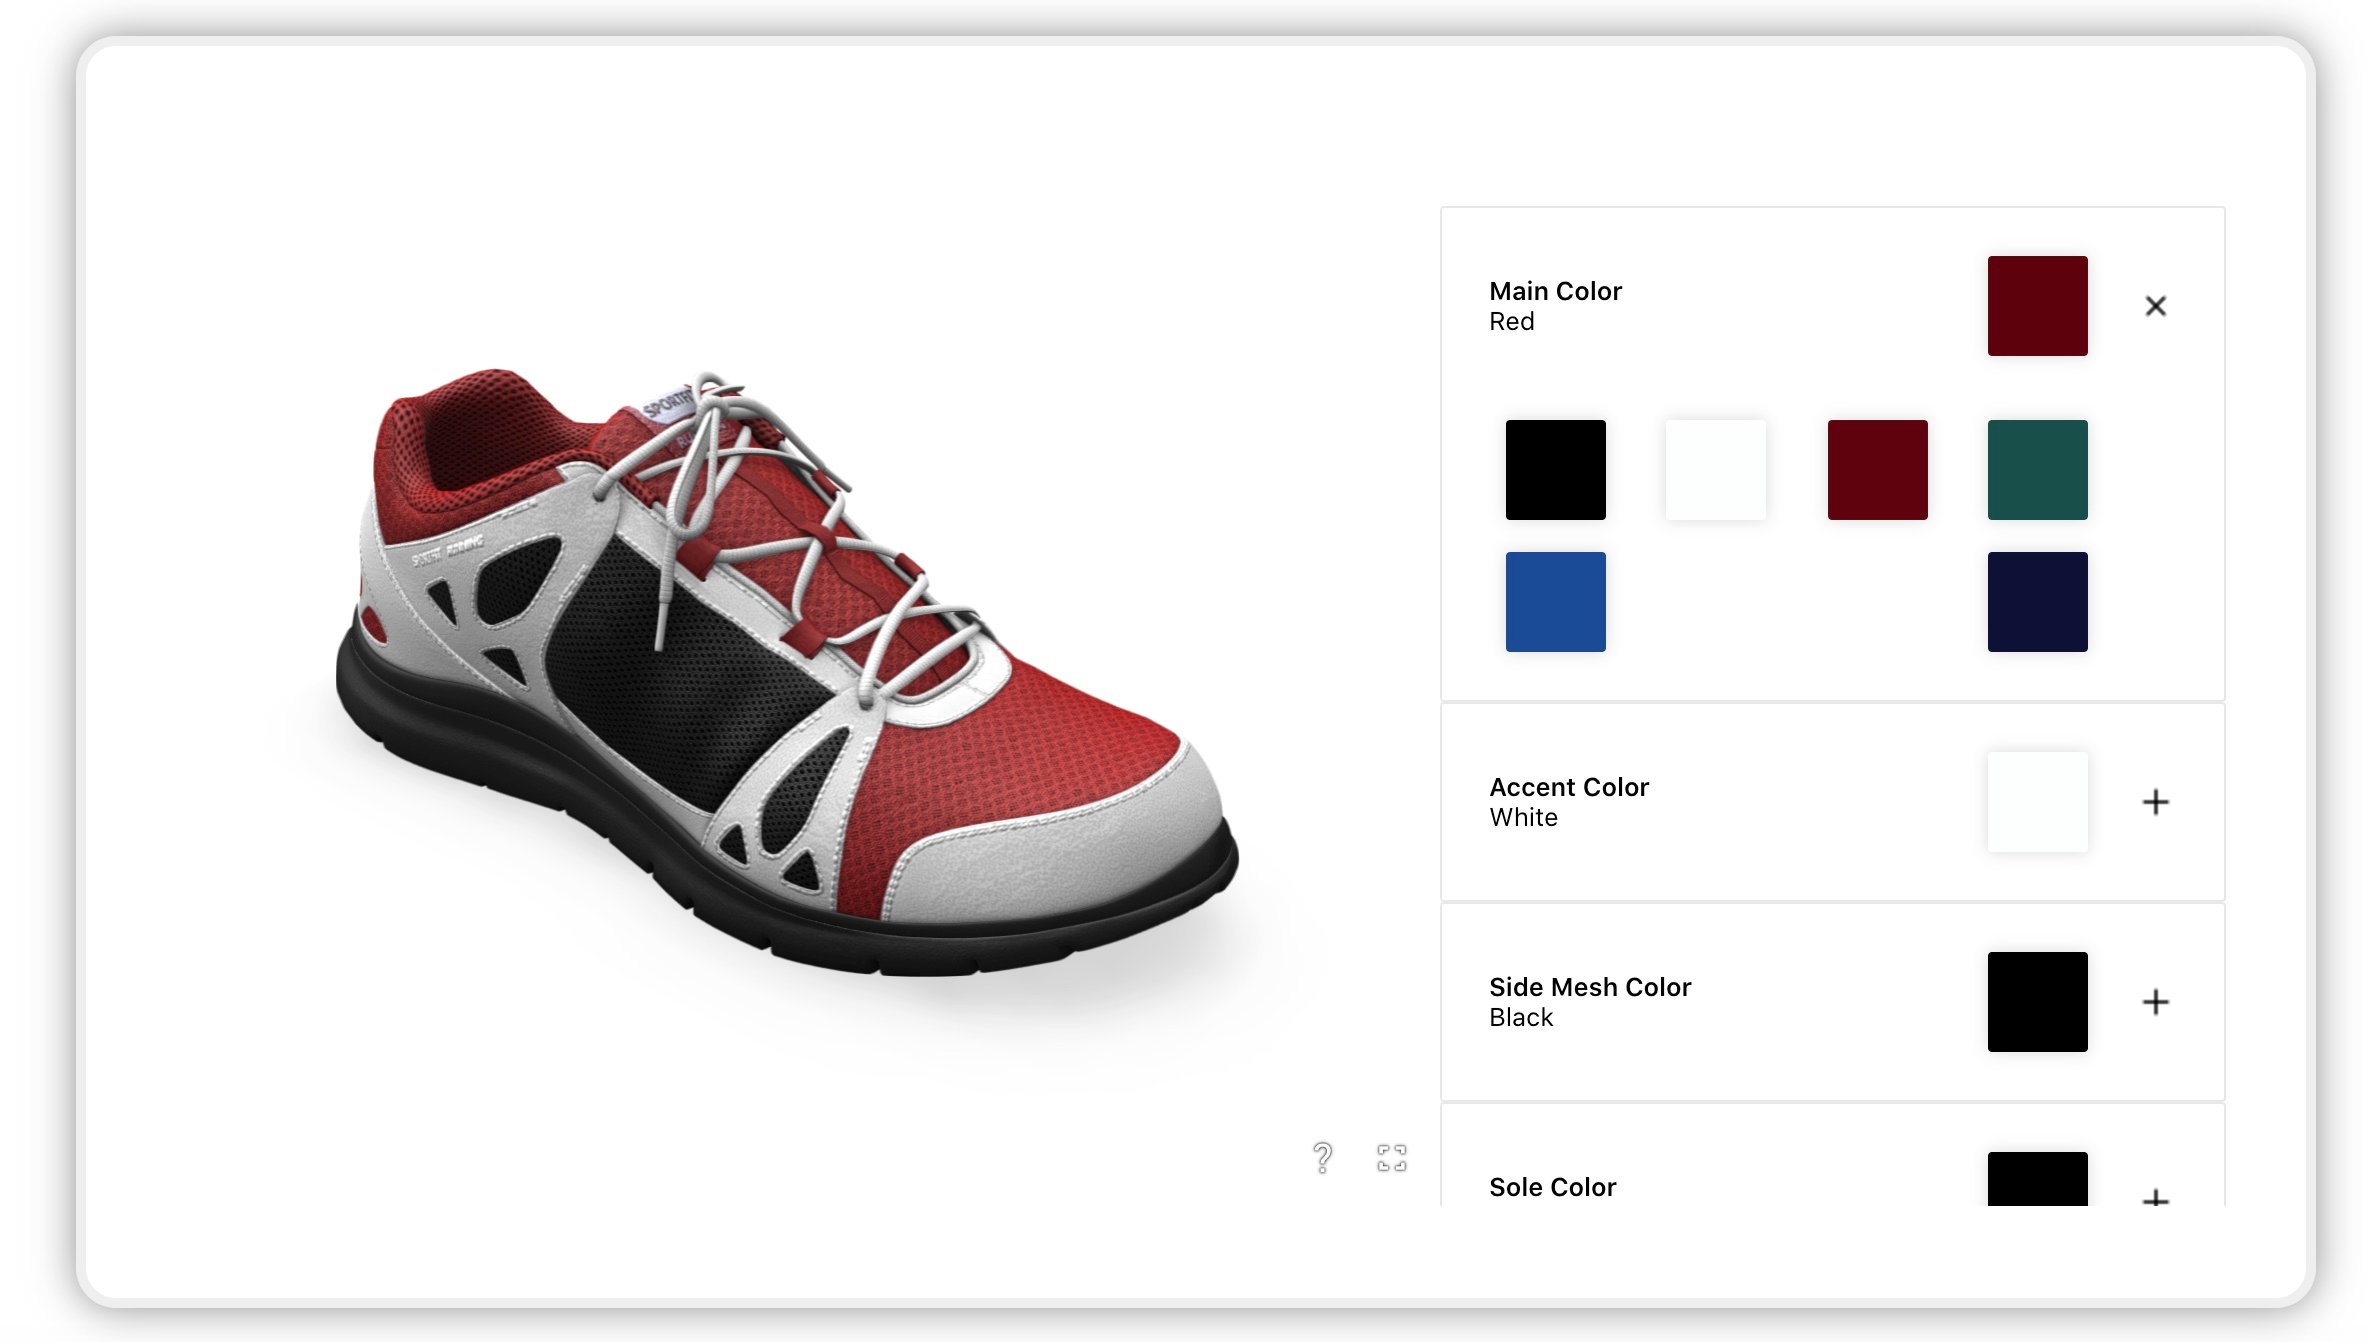 Top 4 Customizable Options People Want in an Adidas Shoe